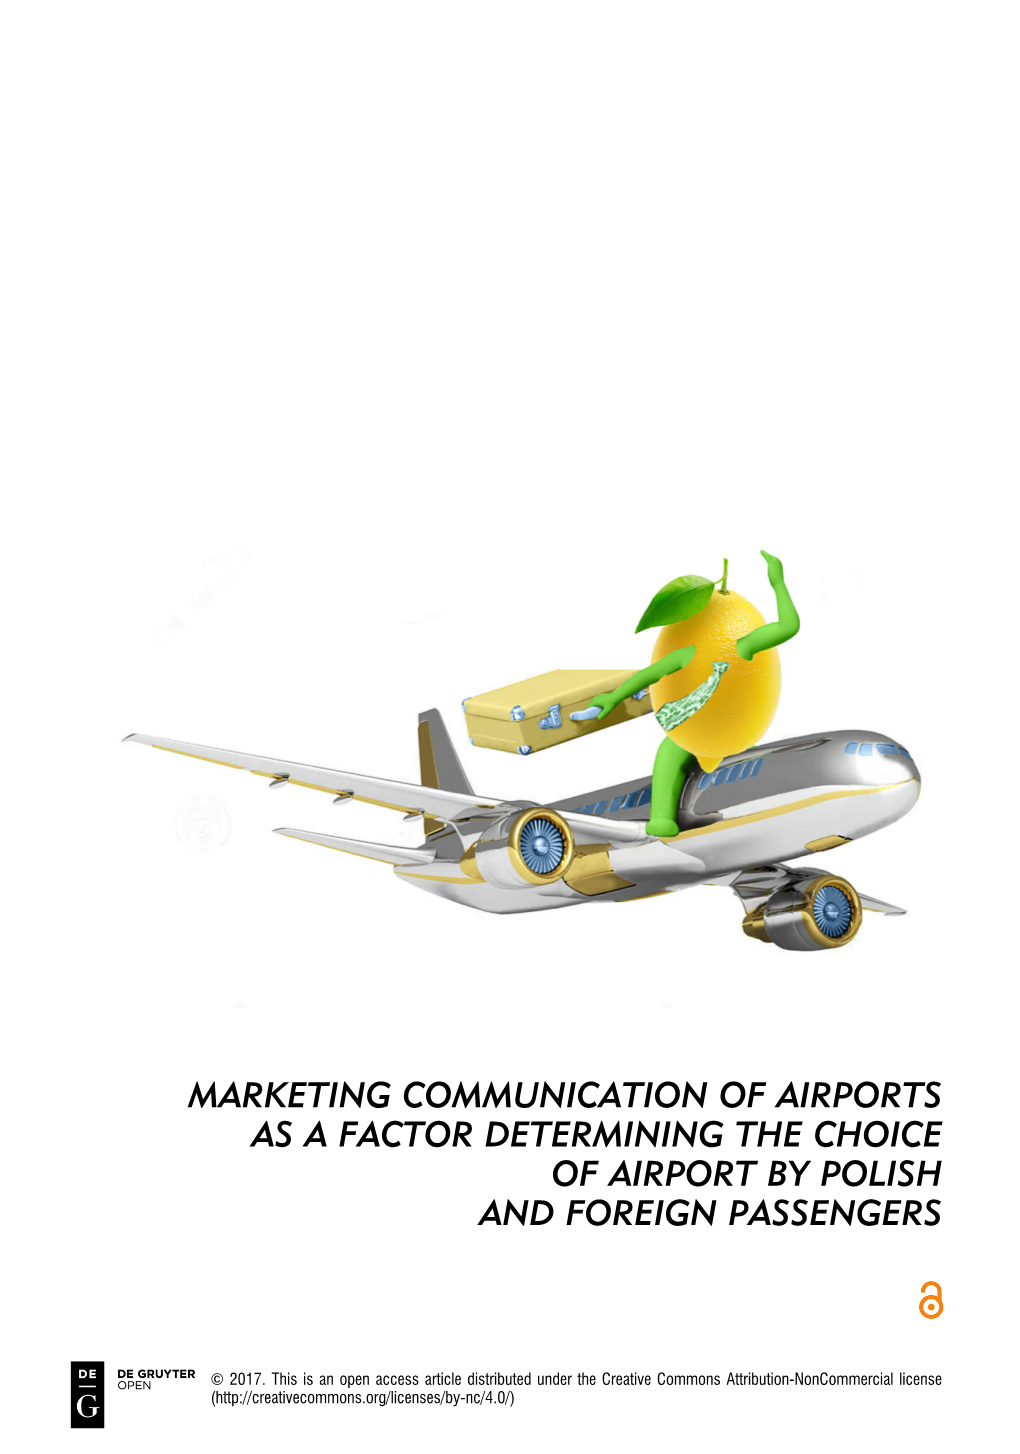 Marketing Communication of Airports As a Factor Determining the Choice of Airport by Polish and Foreign Passengers